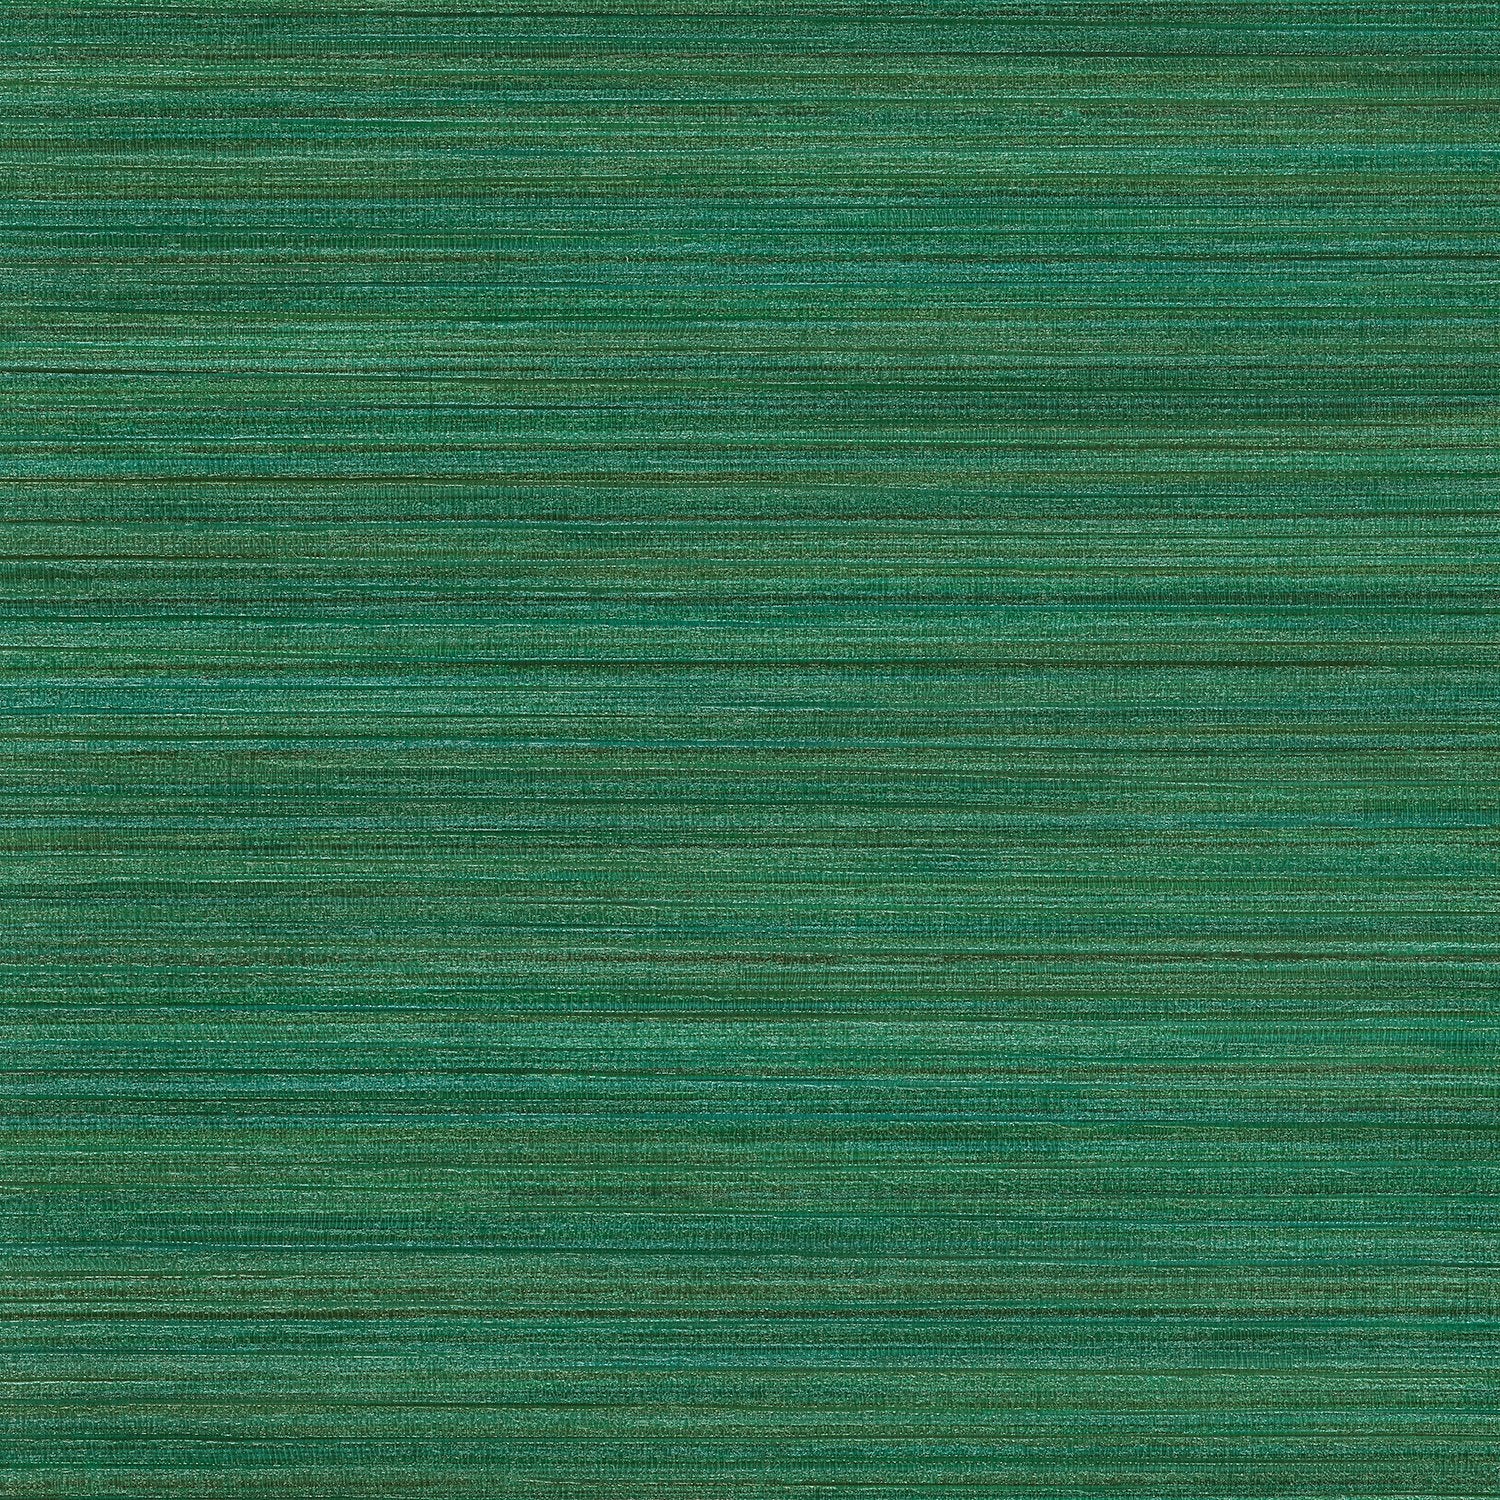 Gallery Silk - Y47748 Viridian - Wallcovering - Vycon - Kube Contract